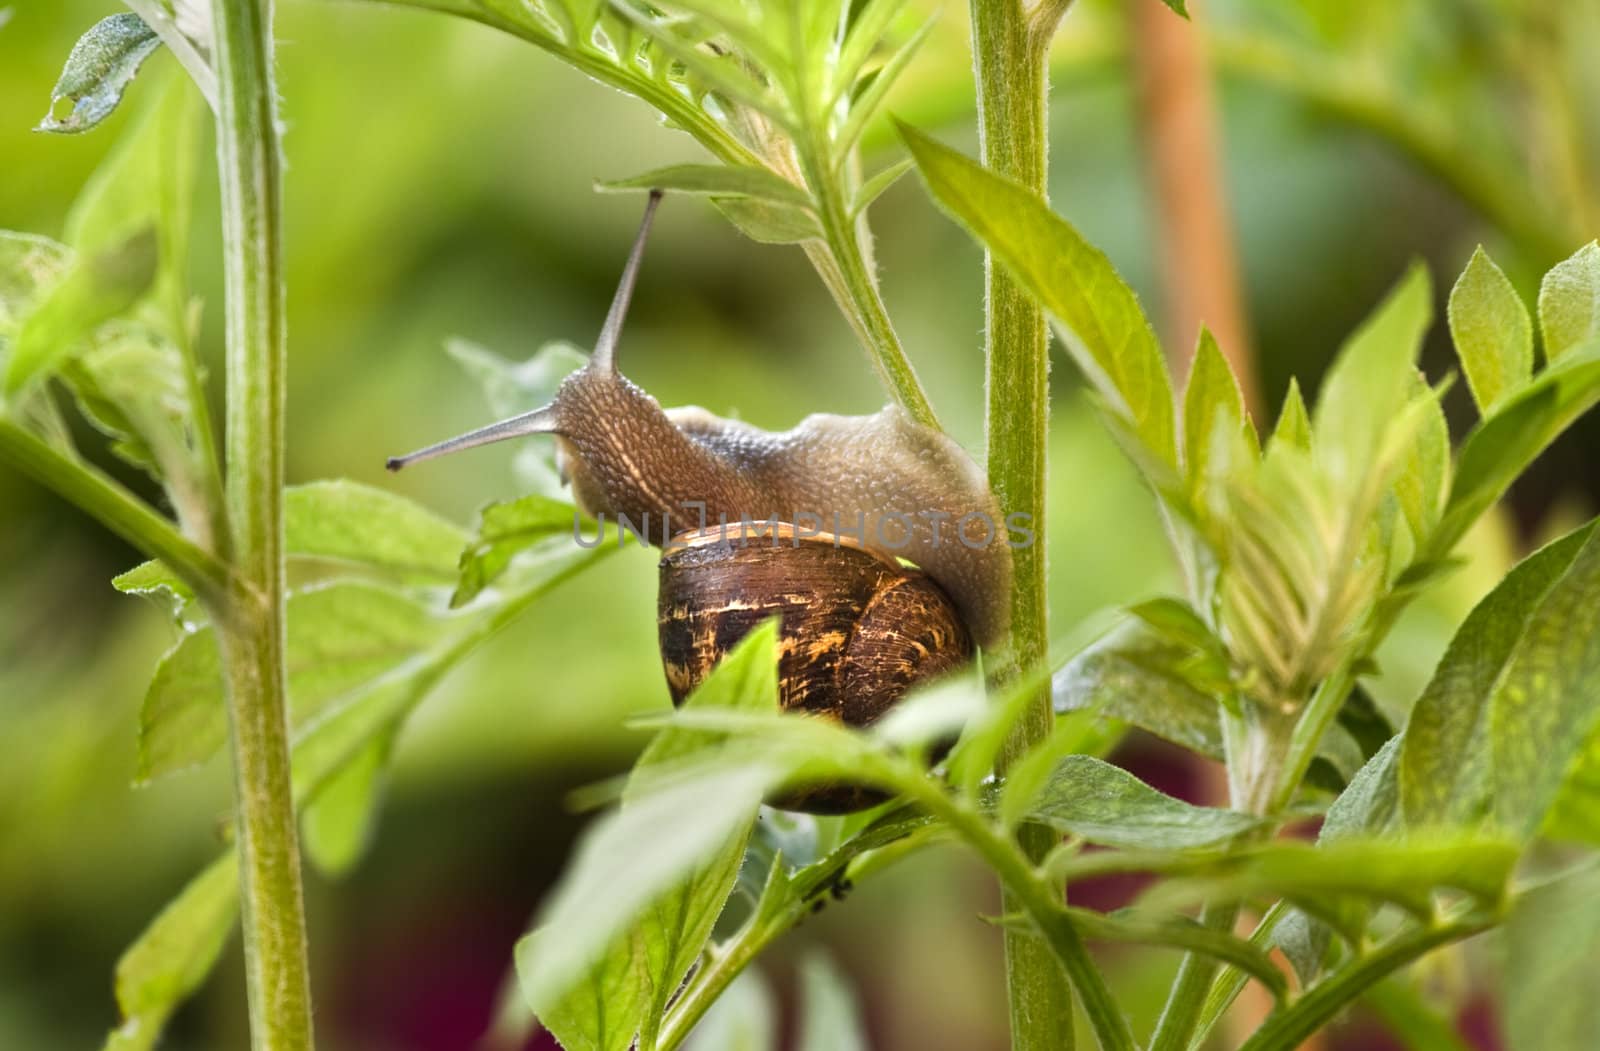 Snail eating leaves and damaging plant by Colette